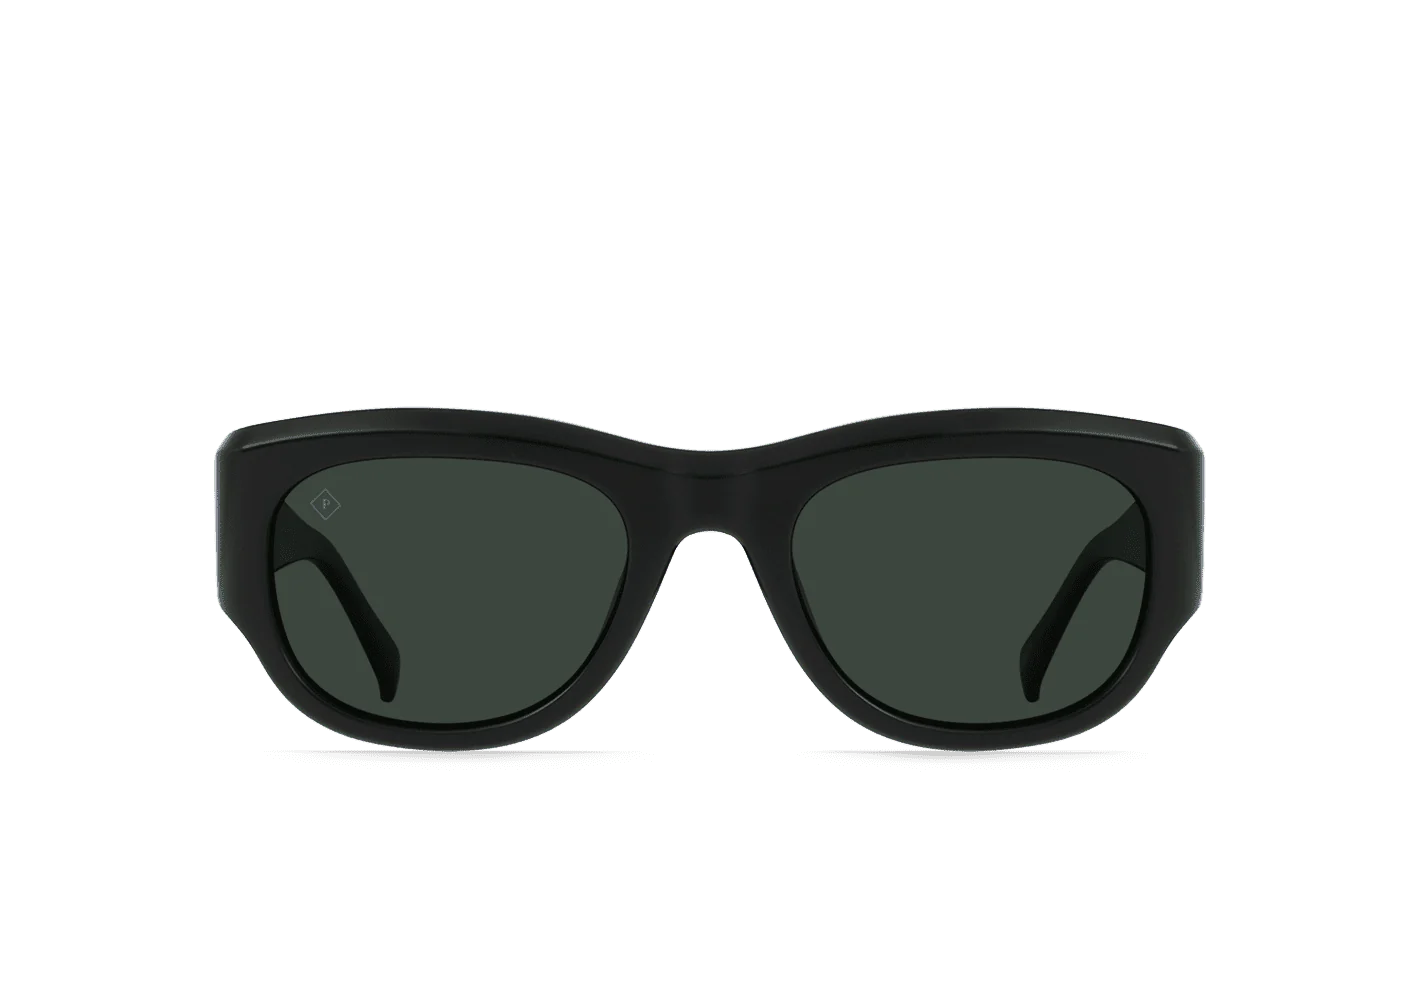 TS-LONSO SUNGLASSES - RECYCLED BLACK/GREEN POLARIZED